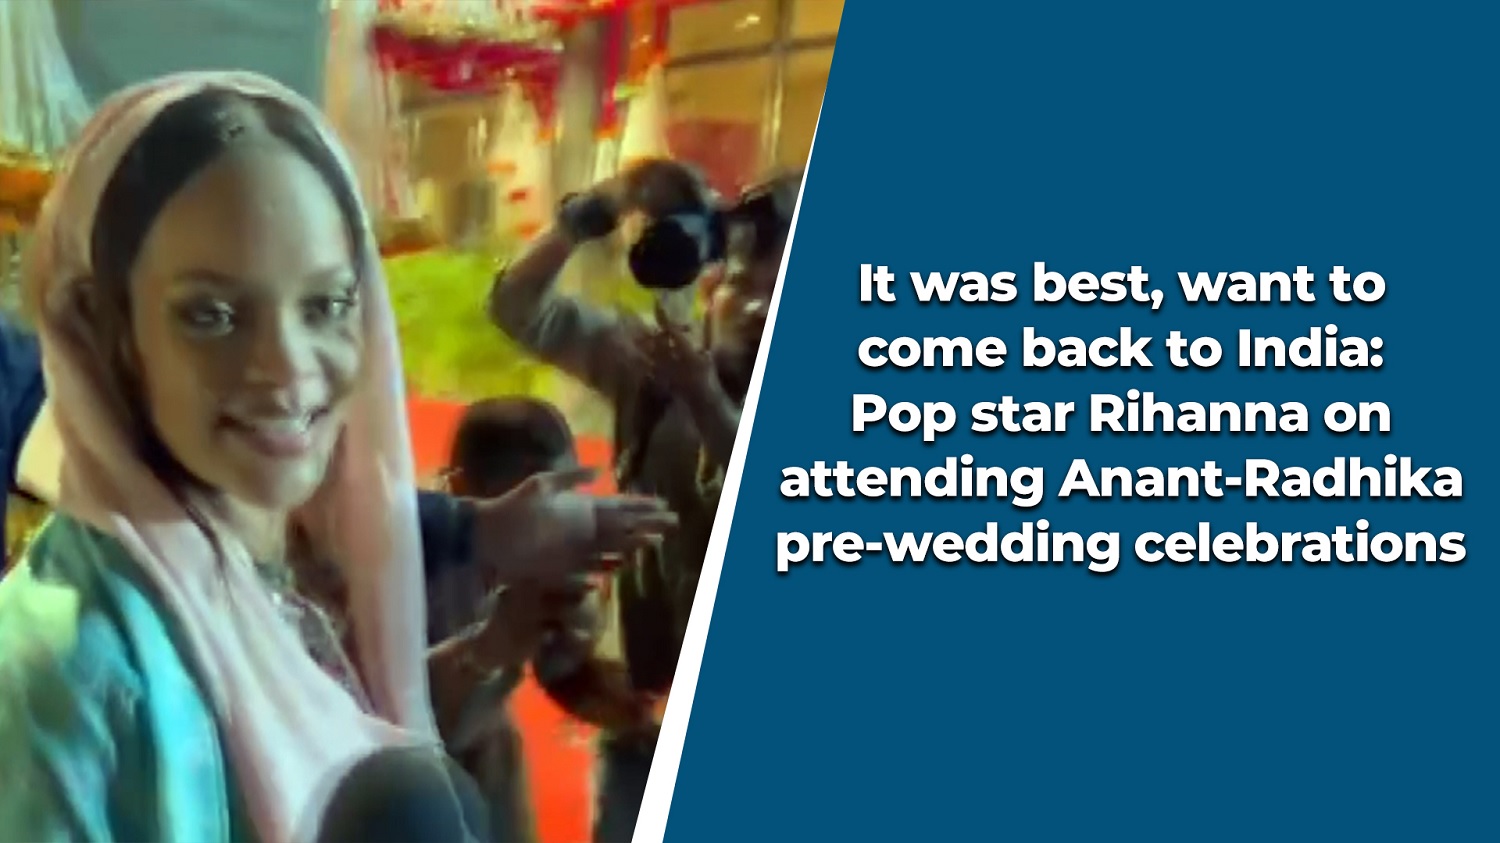 It was best` want to come back to India` Pop star Rihanna on attending Anant-Radhika pre-wedding celebrations